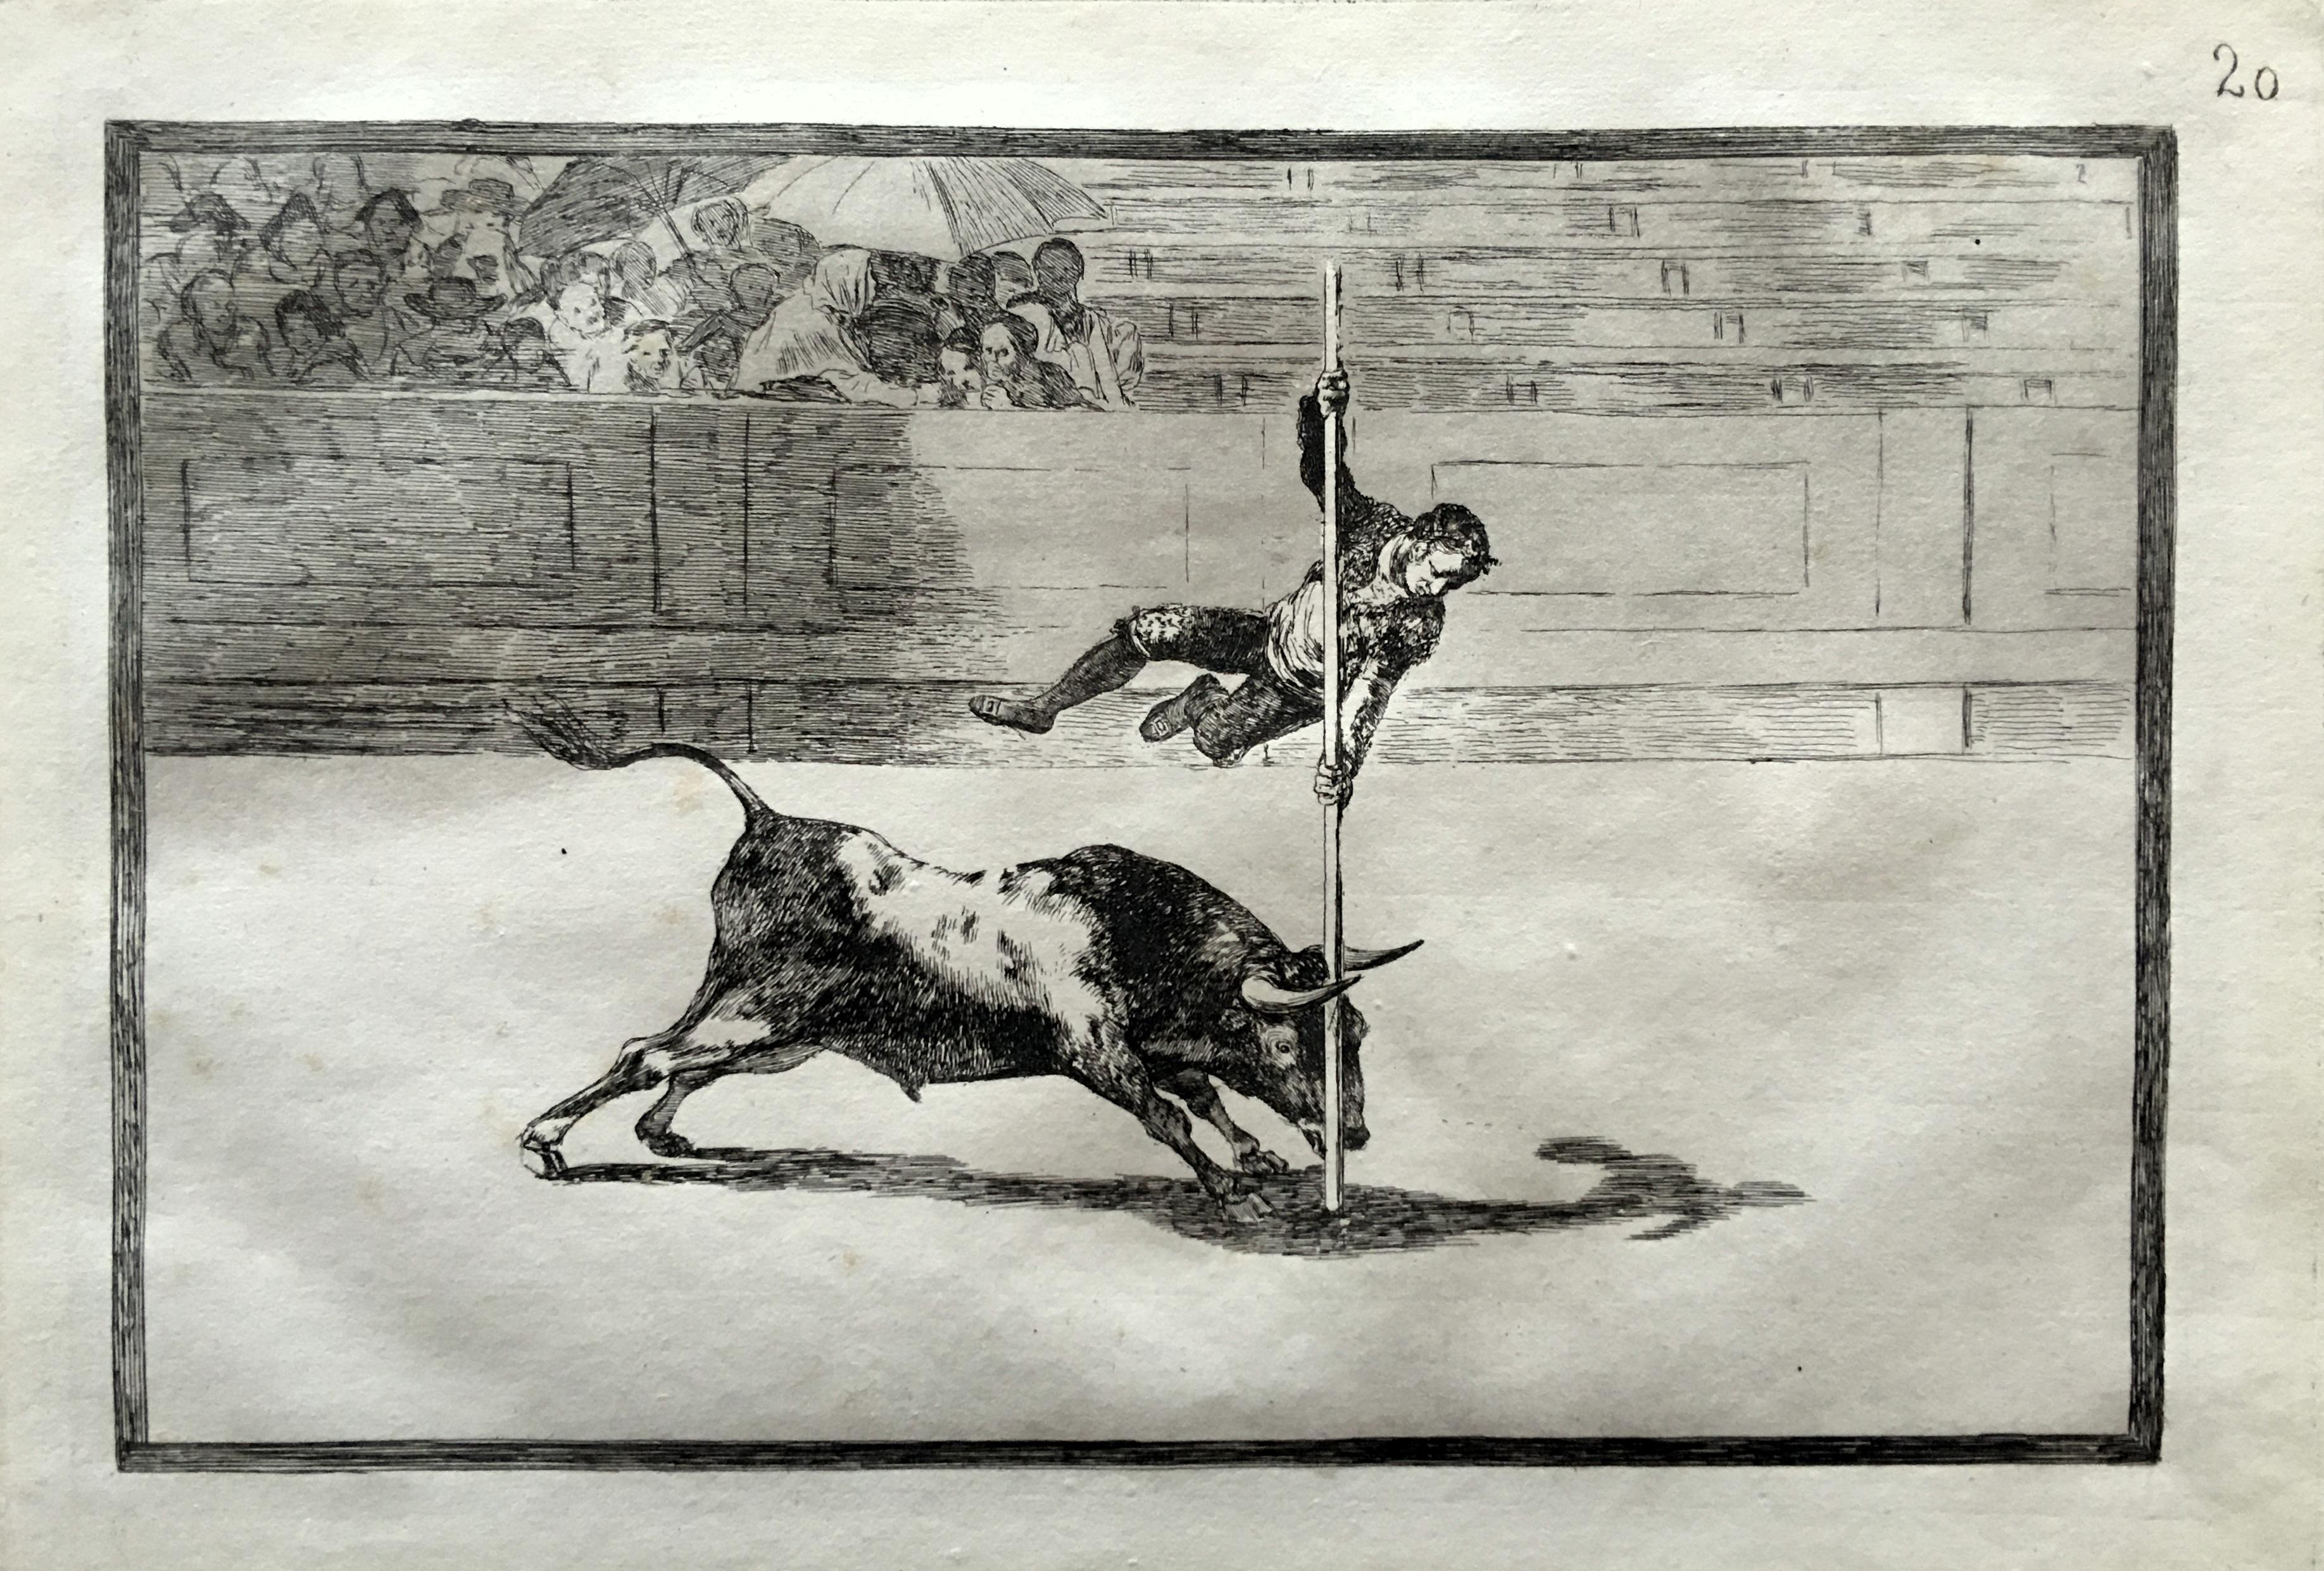 Francisco Goya Figurative Print - The Agility and Audacity of Juanito Apinani in the Ring - 1st Edition, 1816